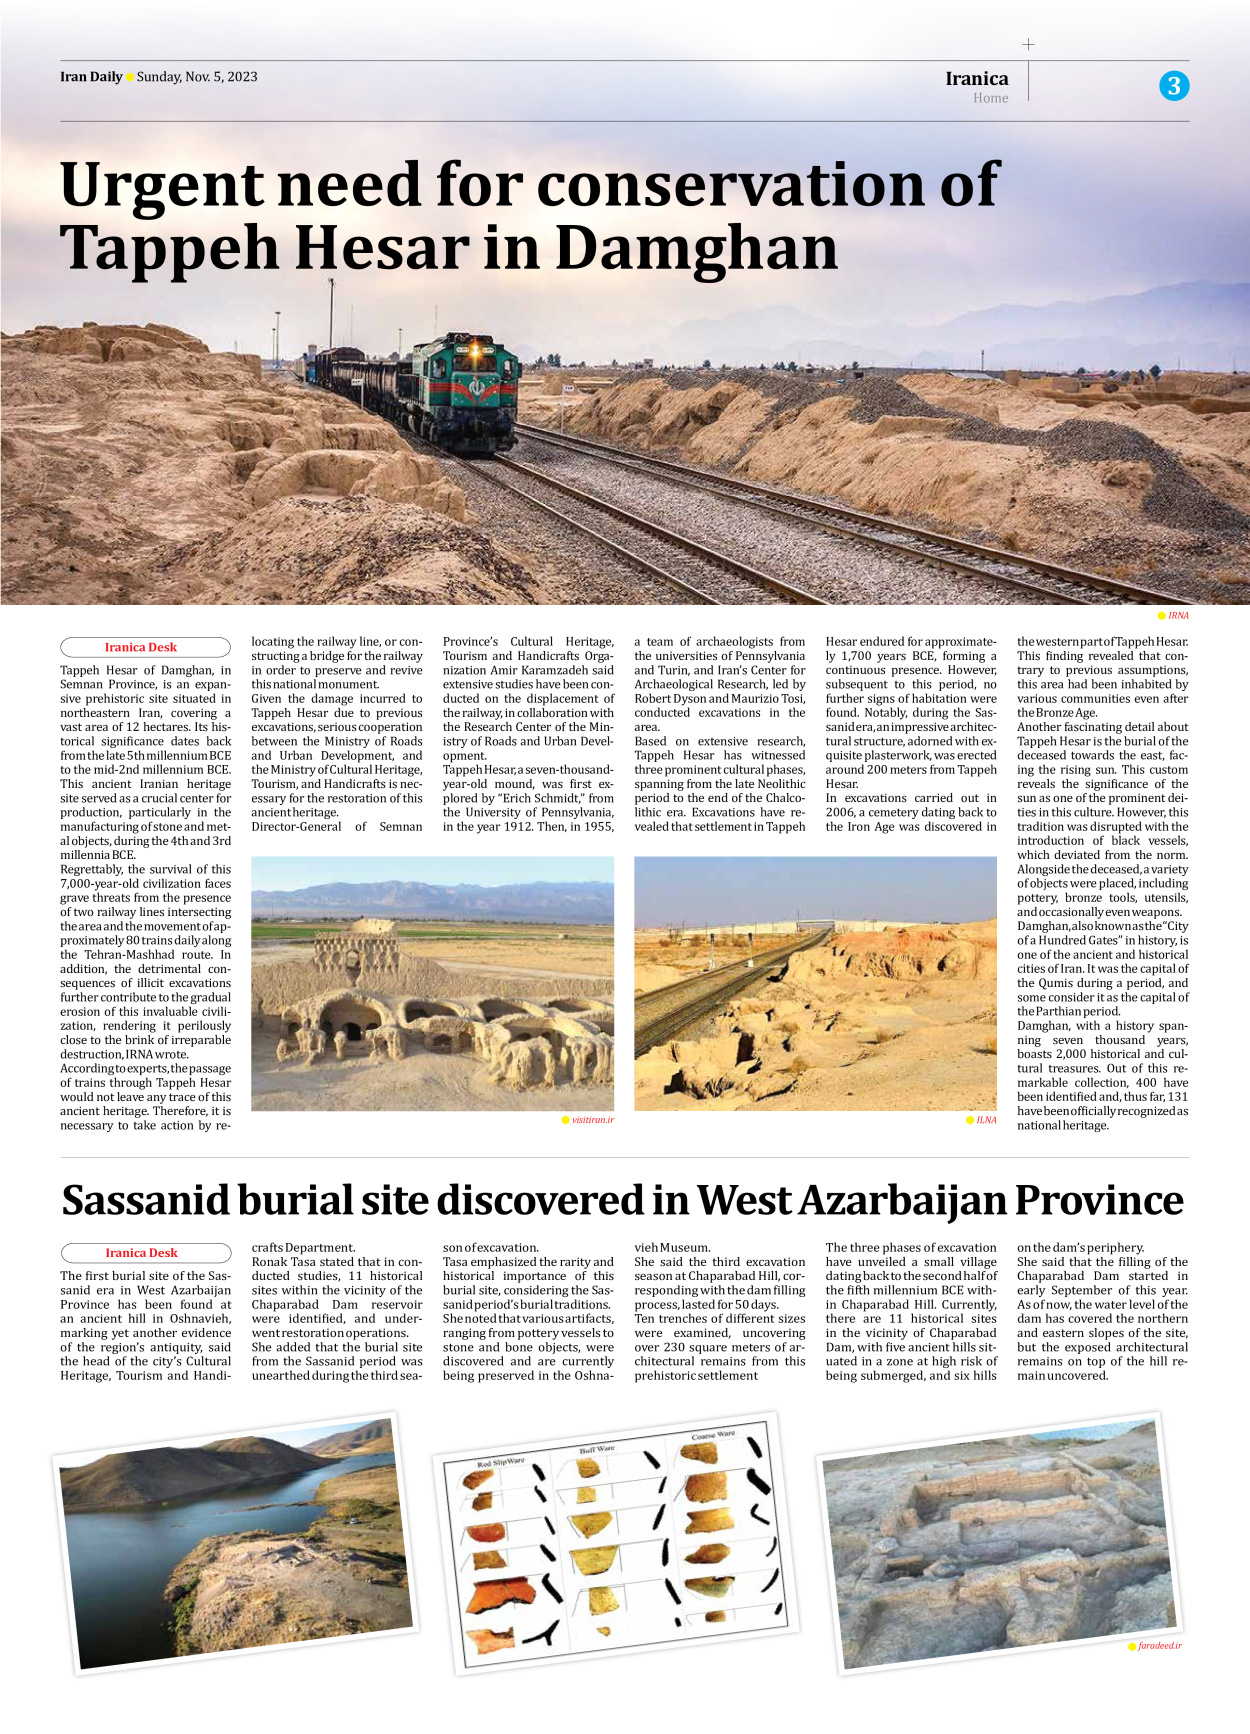 Iran Daily - Number Seven Thousand Four Hundred and Twenty Six - 05 November 2023 - Page 3